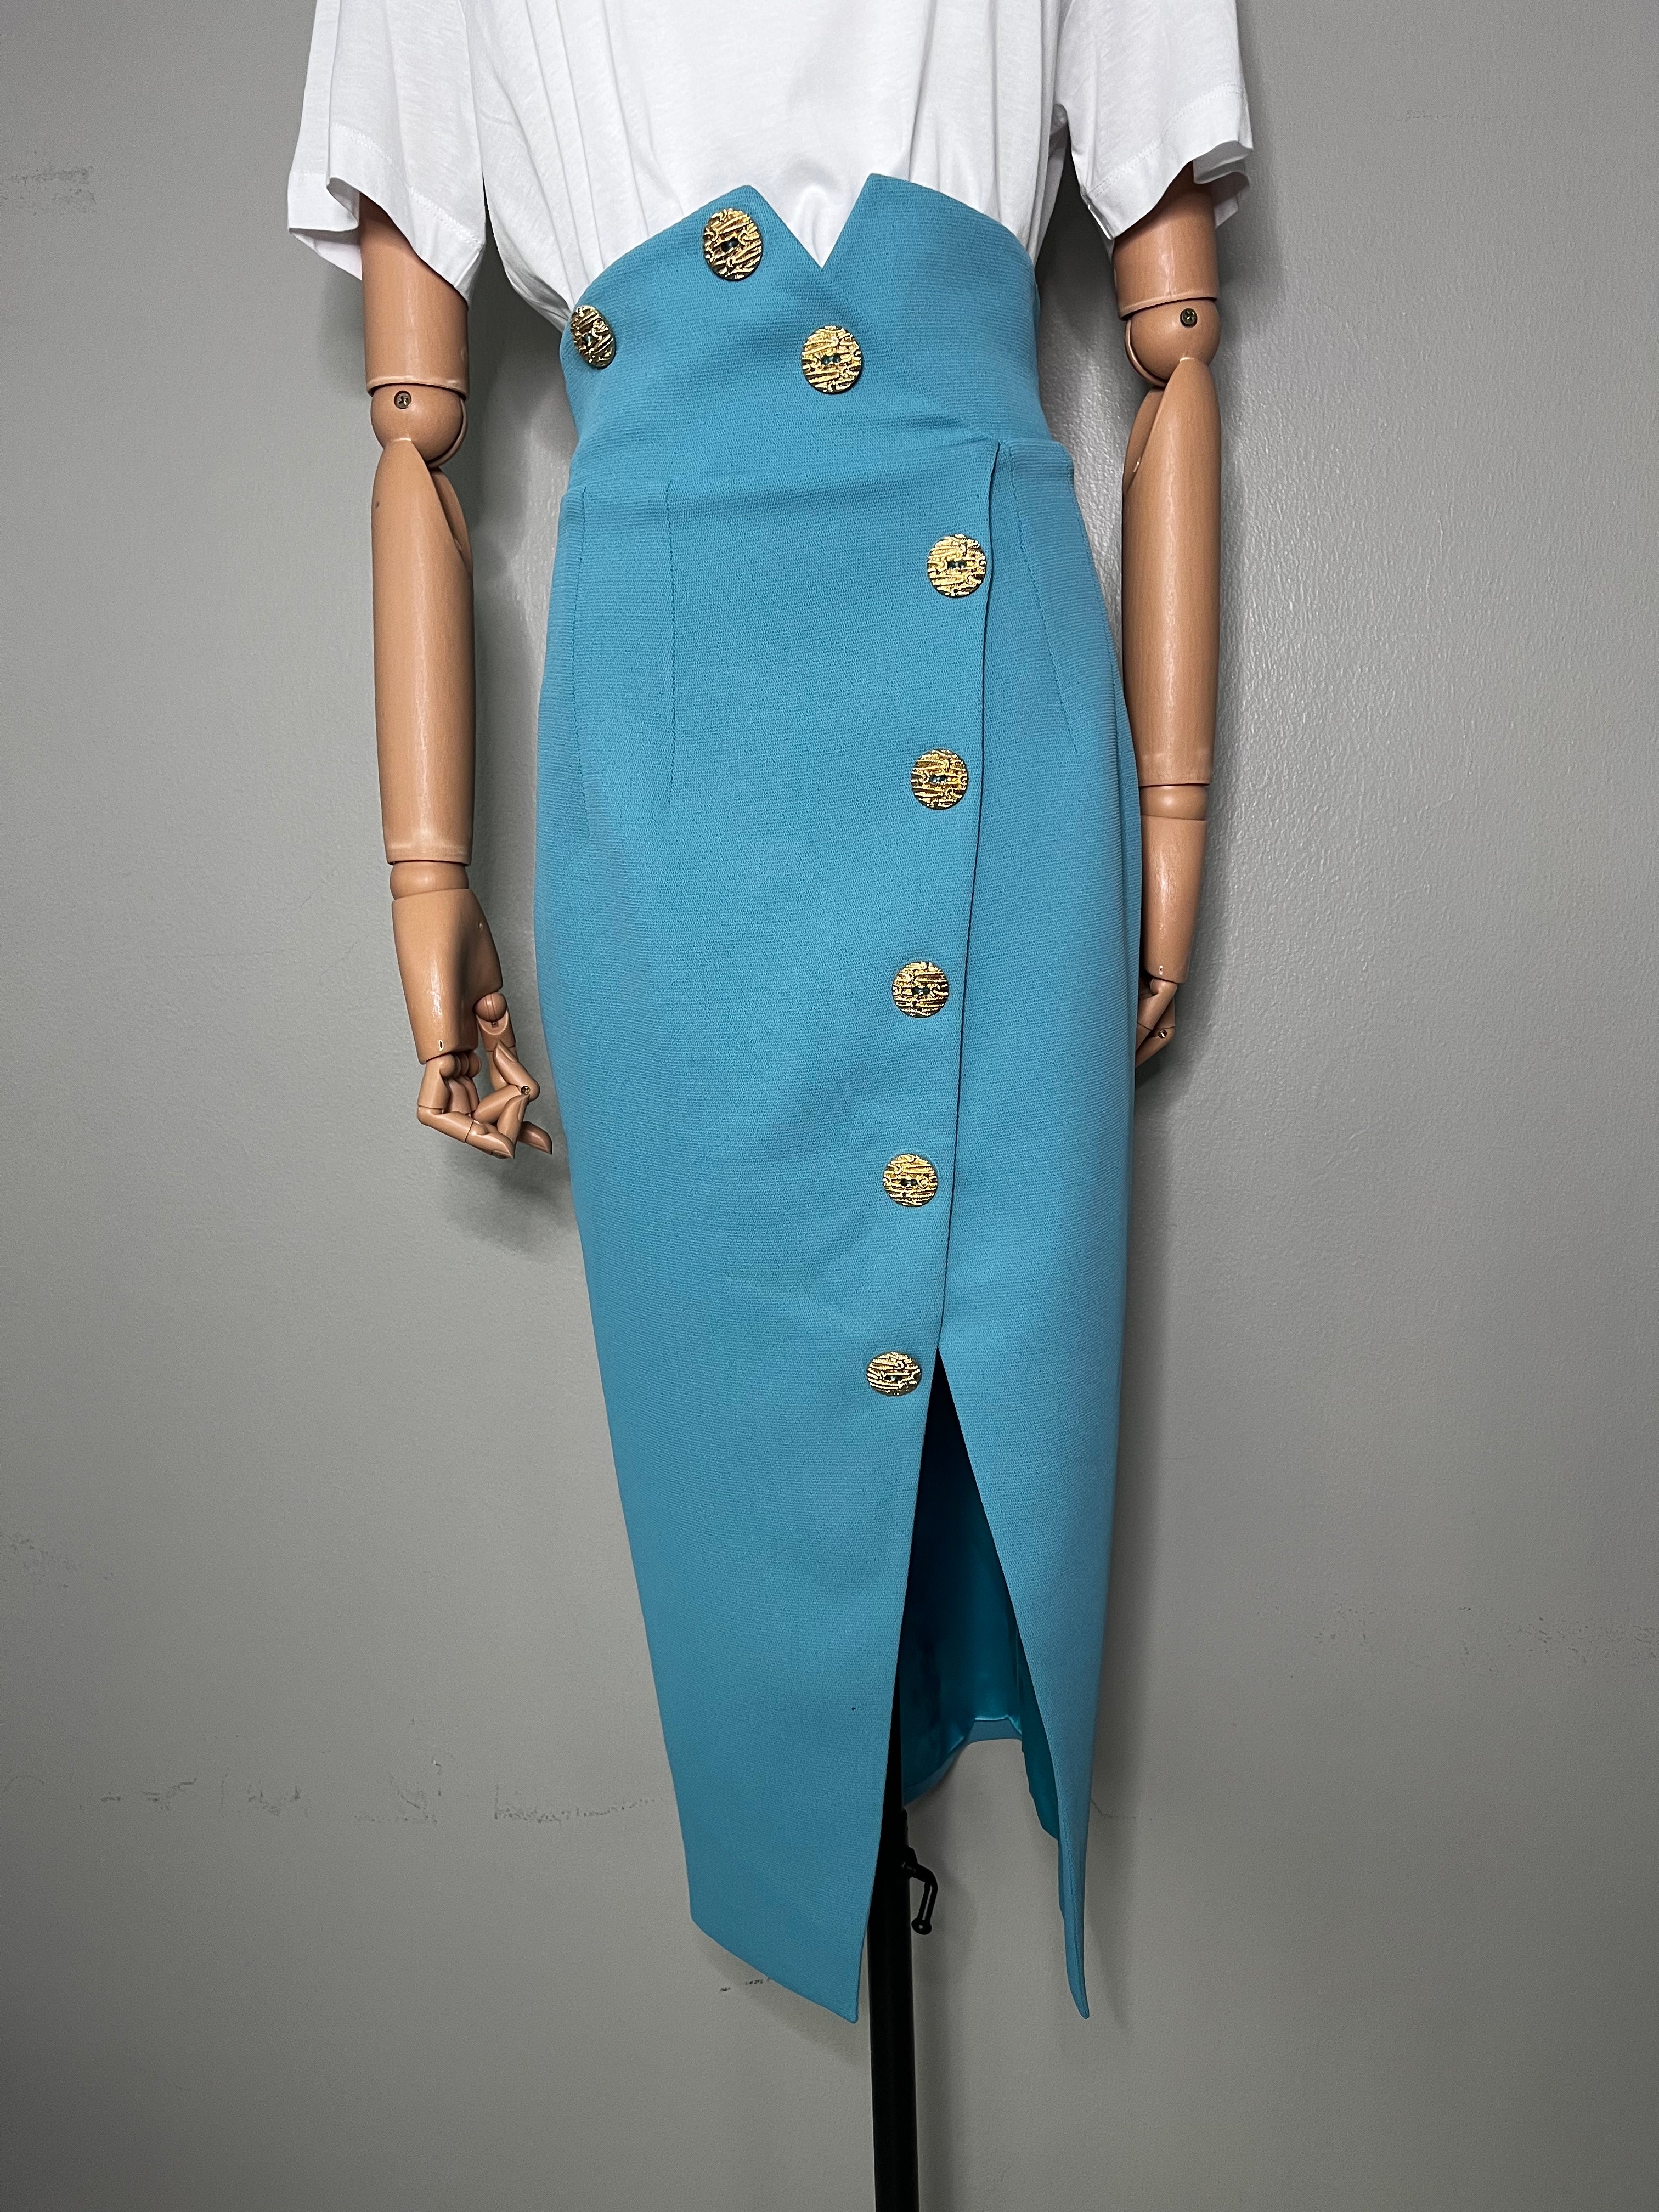 Long sky blue skirt with slit at the middle and big gold buttons all the way down and on the waistline. - GLAMODA.